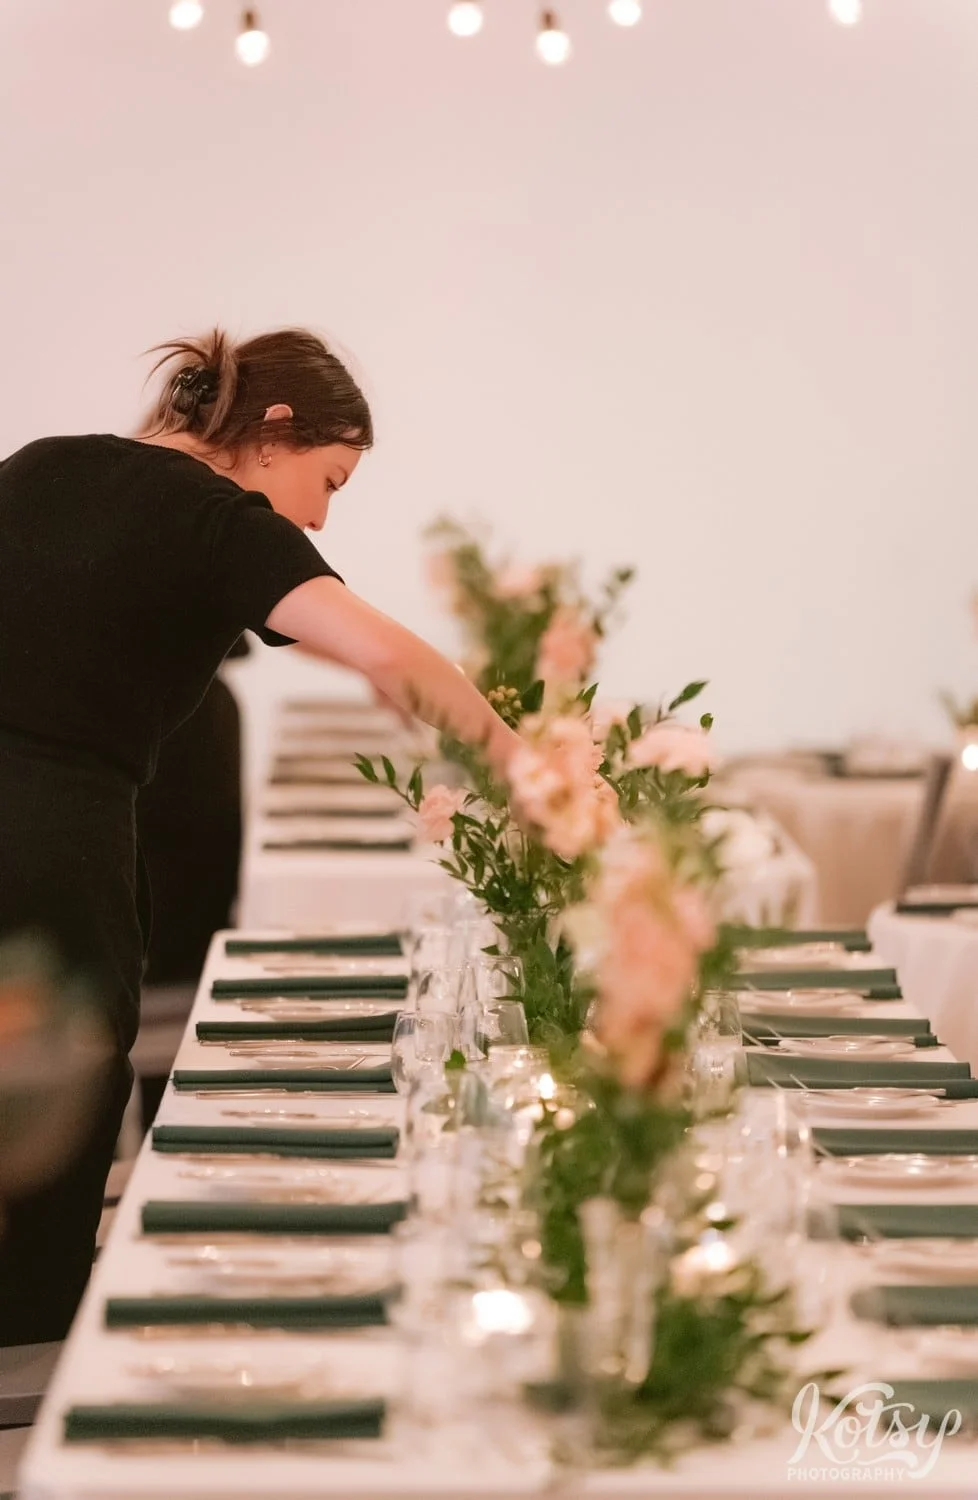 shot down a long table set up for guests. A woman is seen at the end lighting a candle. Photographed at second floor events in Toronto Canada